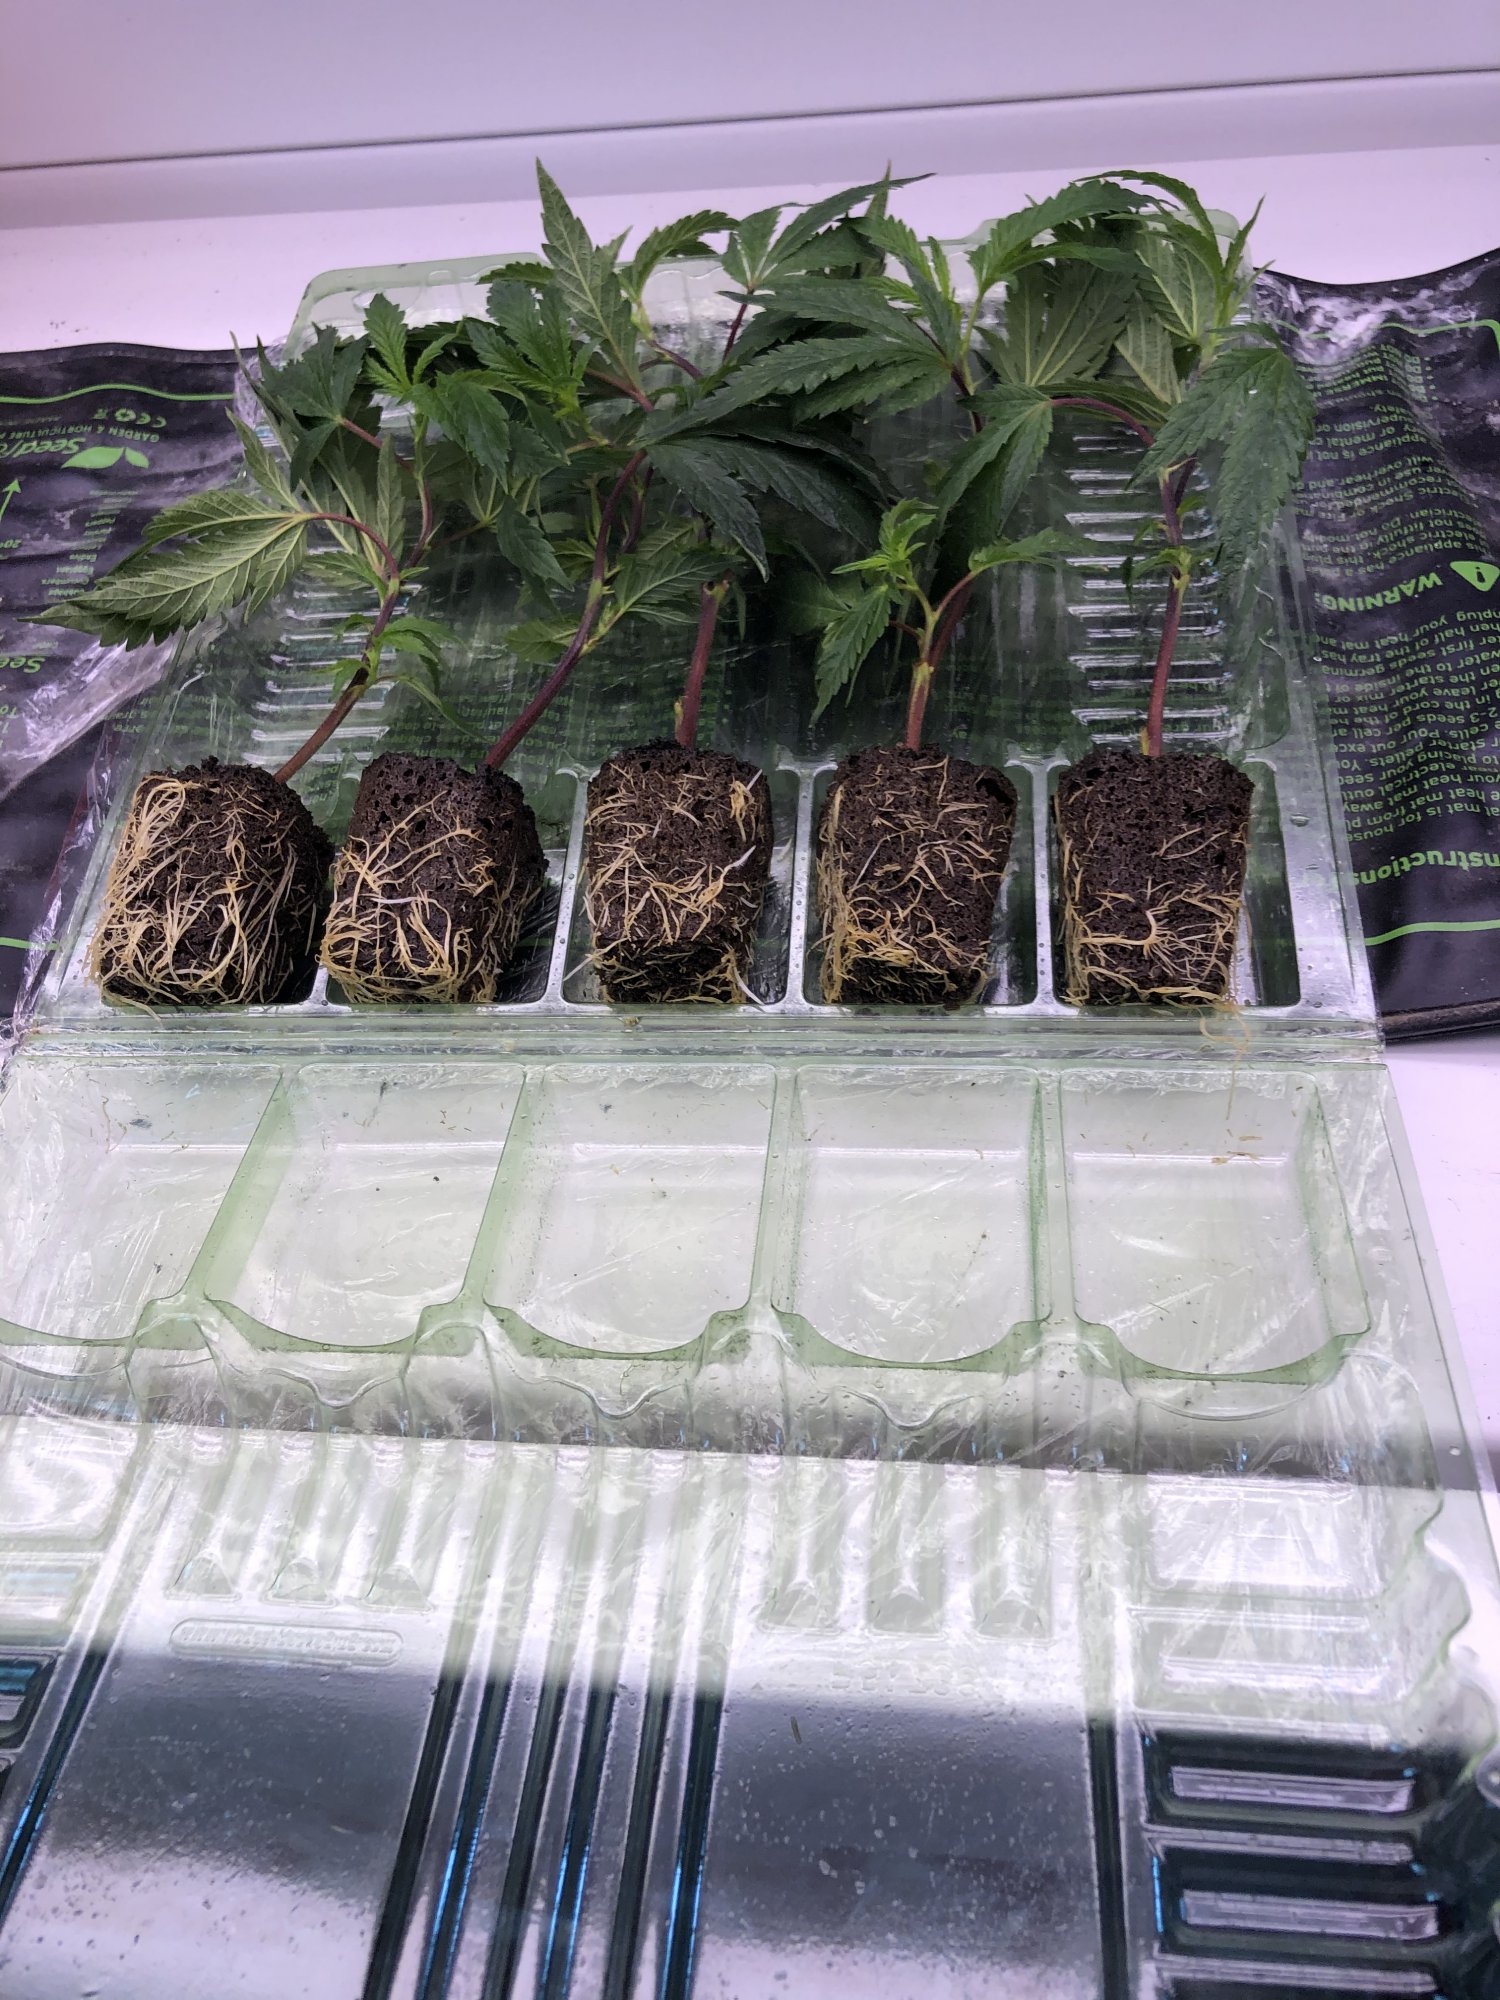 Just received my clones from dookiefarms